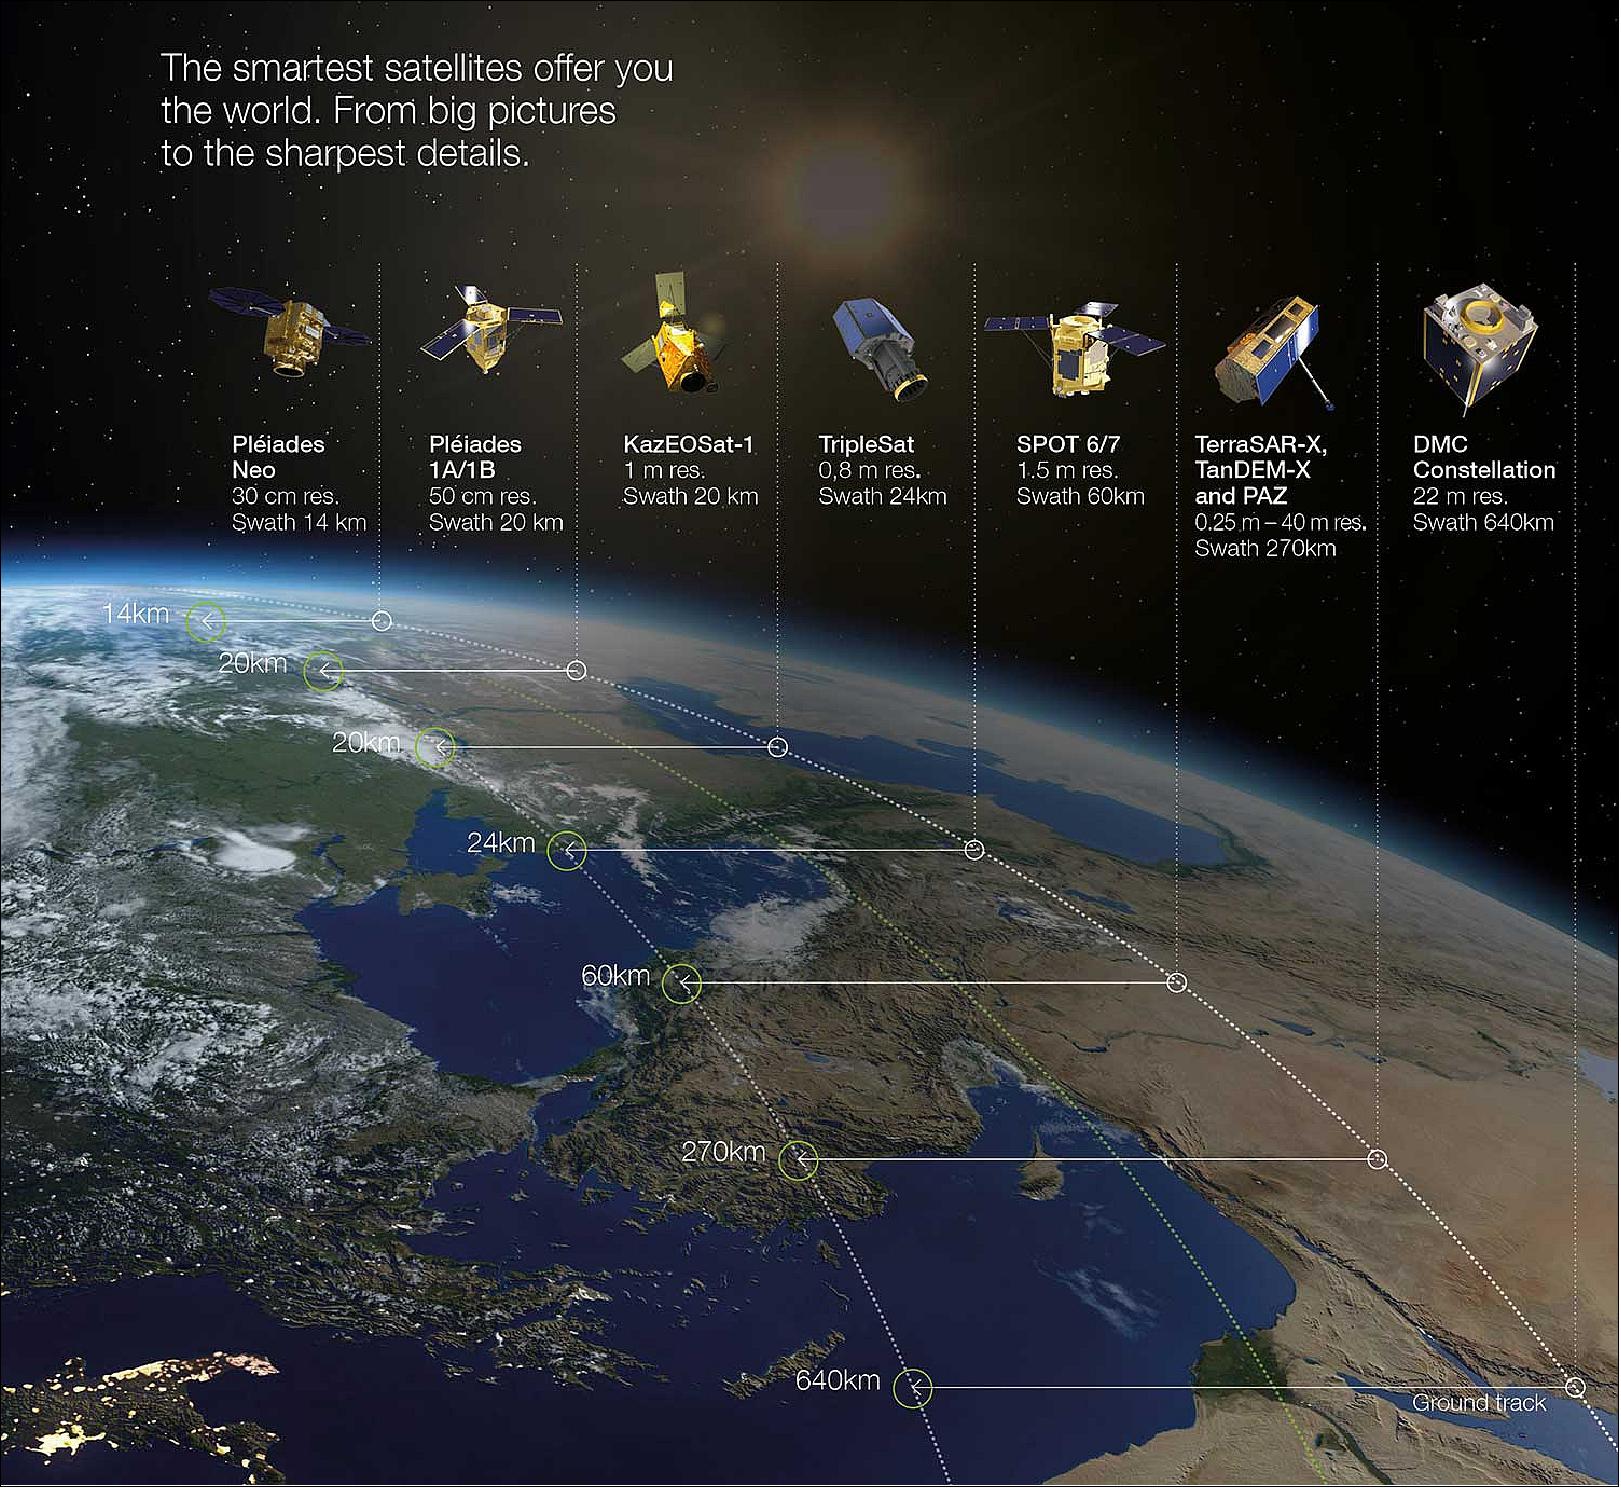 Figure 3: Overview of Airbus constellation (image credit: Airbus) 3)